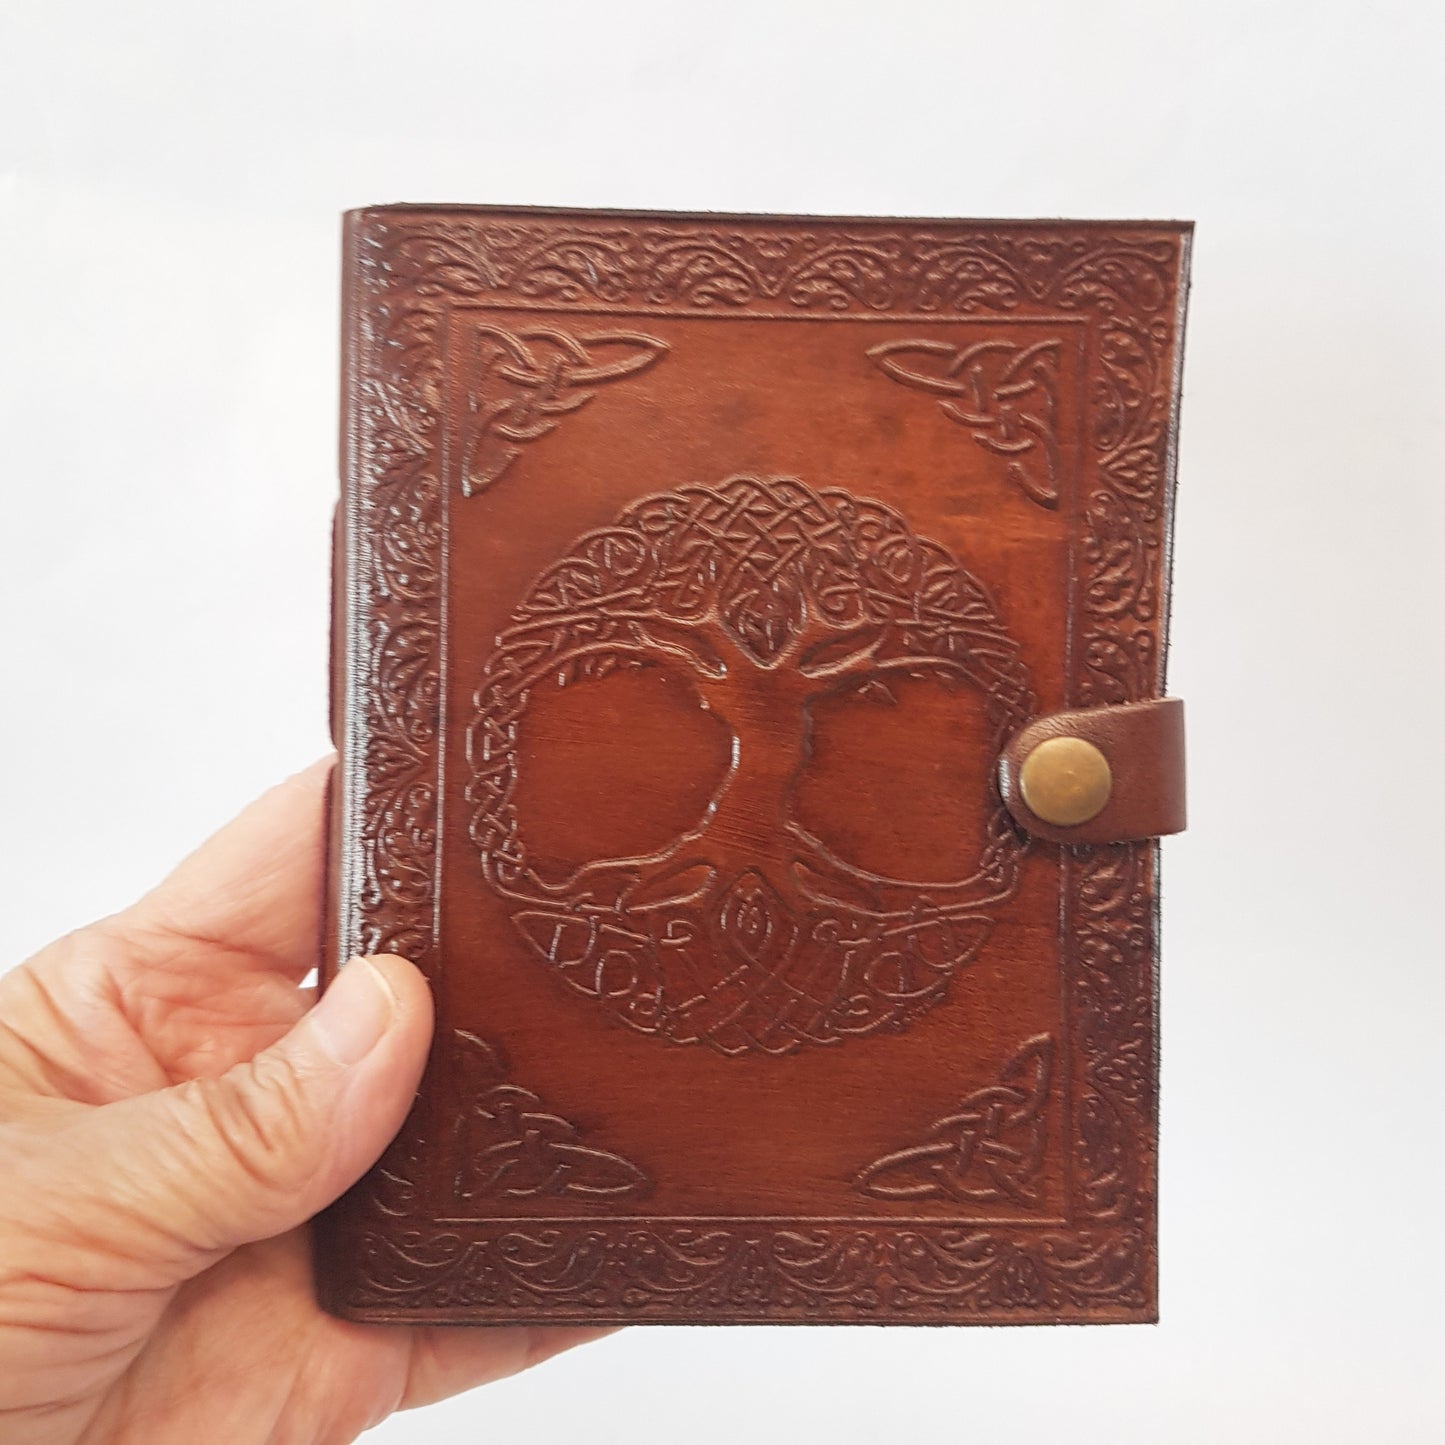 Leather bound journal with a hand embossed Celtic Tree cover design.